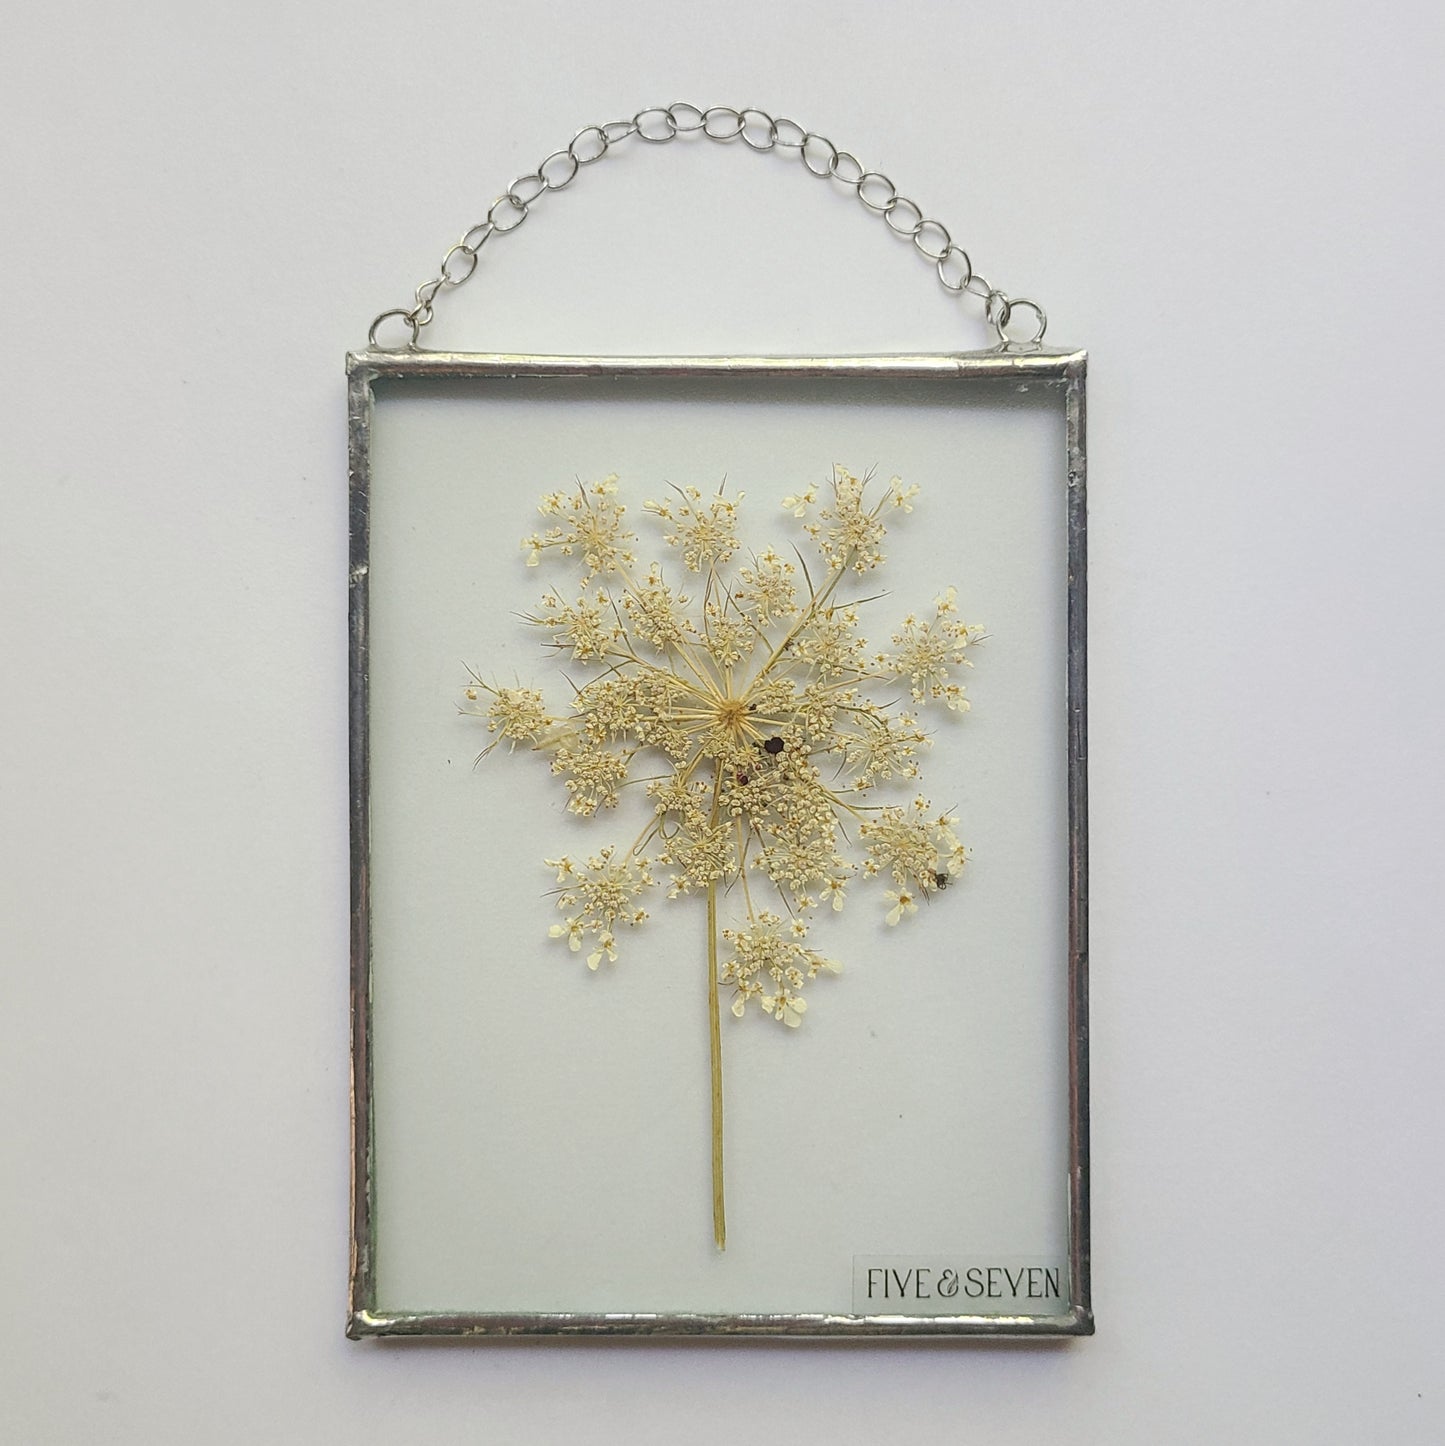 Queen Anne's Lace Floral Frame